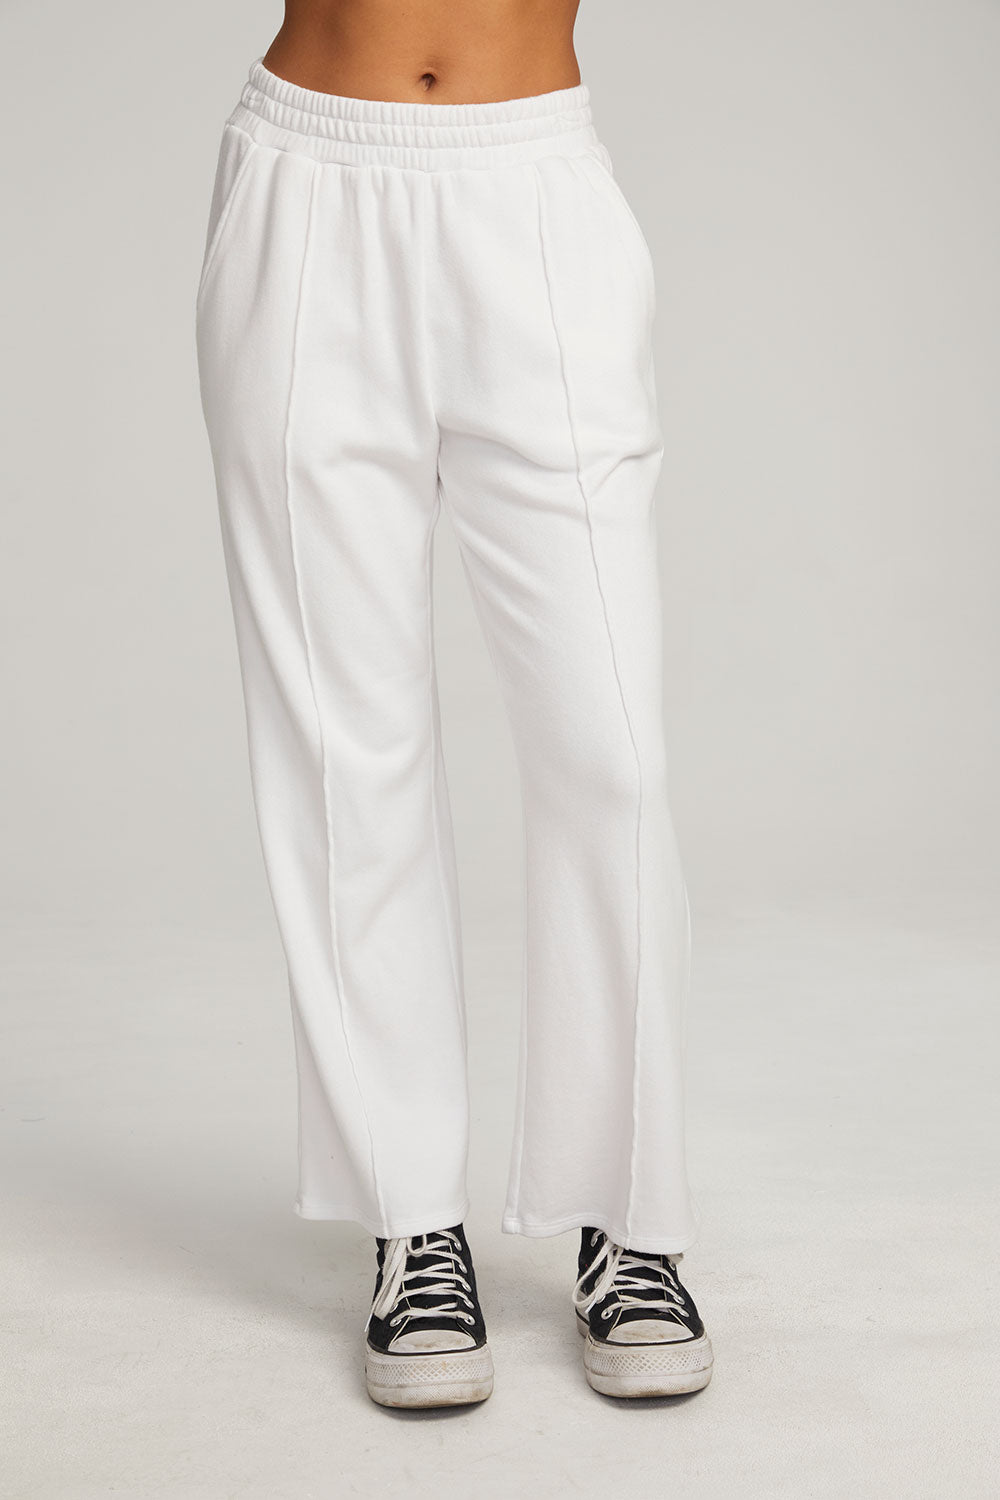 White Trousers For Women, Ladies' White Trousers